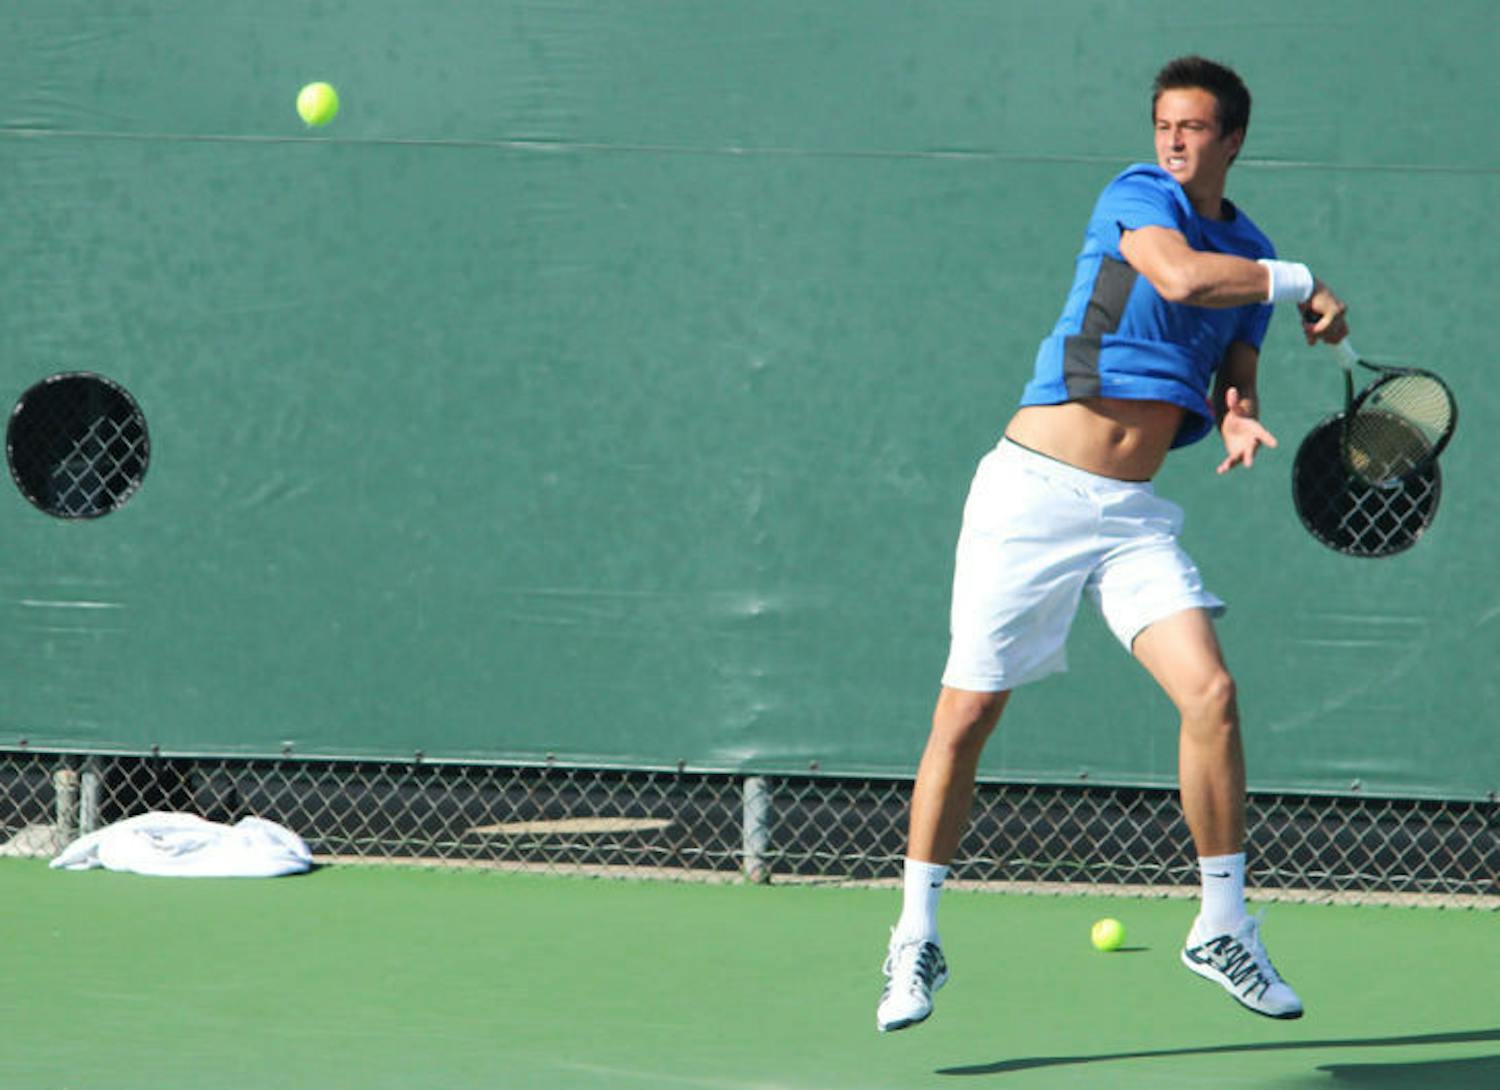 Florent Diep swings at the ball during Florida’s 4-2 win against TCU on Jan. 26 at the Ring Tennis Complex.